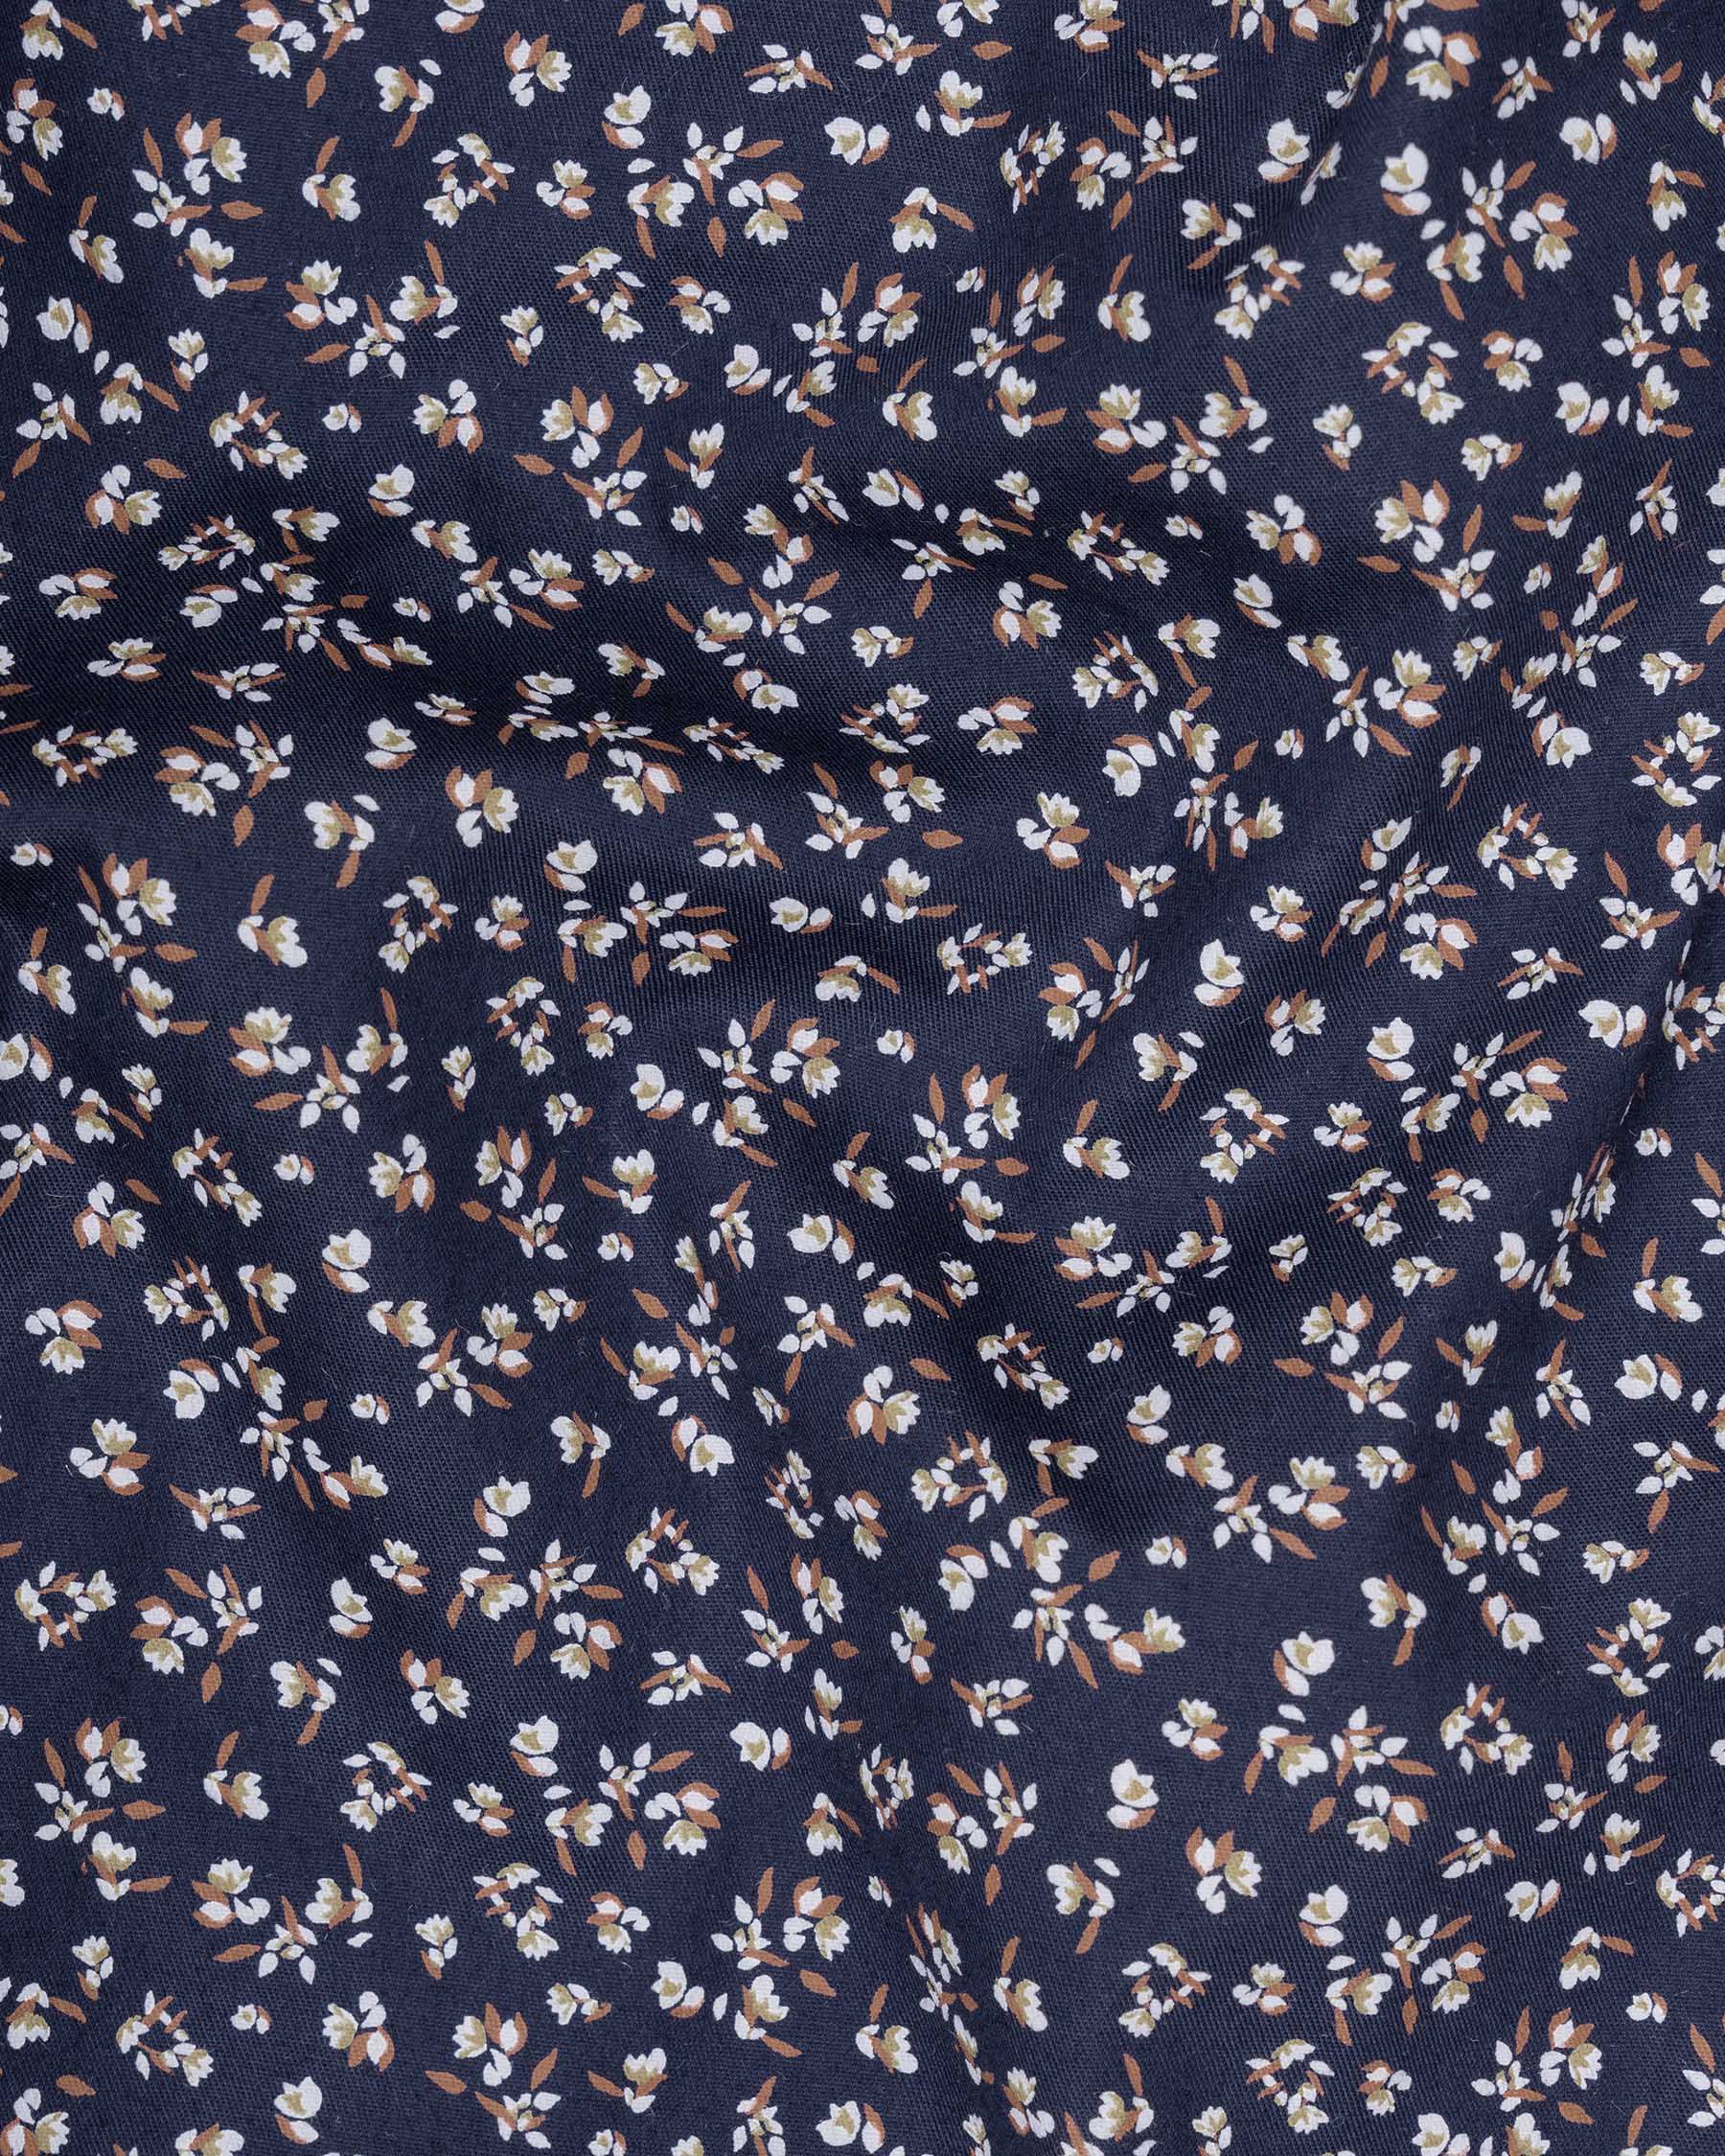 Mirage Blue and White Floral Printed Super Soft Premium Cotton Shirt 6710-BD-38,6710-BD-38,6710-BD-39,6710-BD-39,6710-BD-40,6710-BD-40,6710-BD-42,6710-BD-42,6710-BD-44,6710-BD-44,6710-BD-46,6710-BD-46,6710-BD-48,6710-BD-48,6710-BD-50,6710-BD-50,6710-BD-52,6710-BD-52